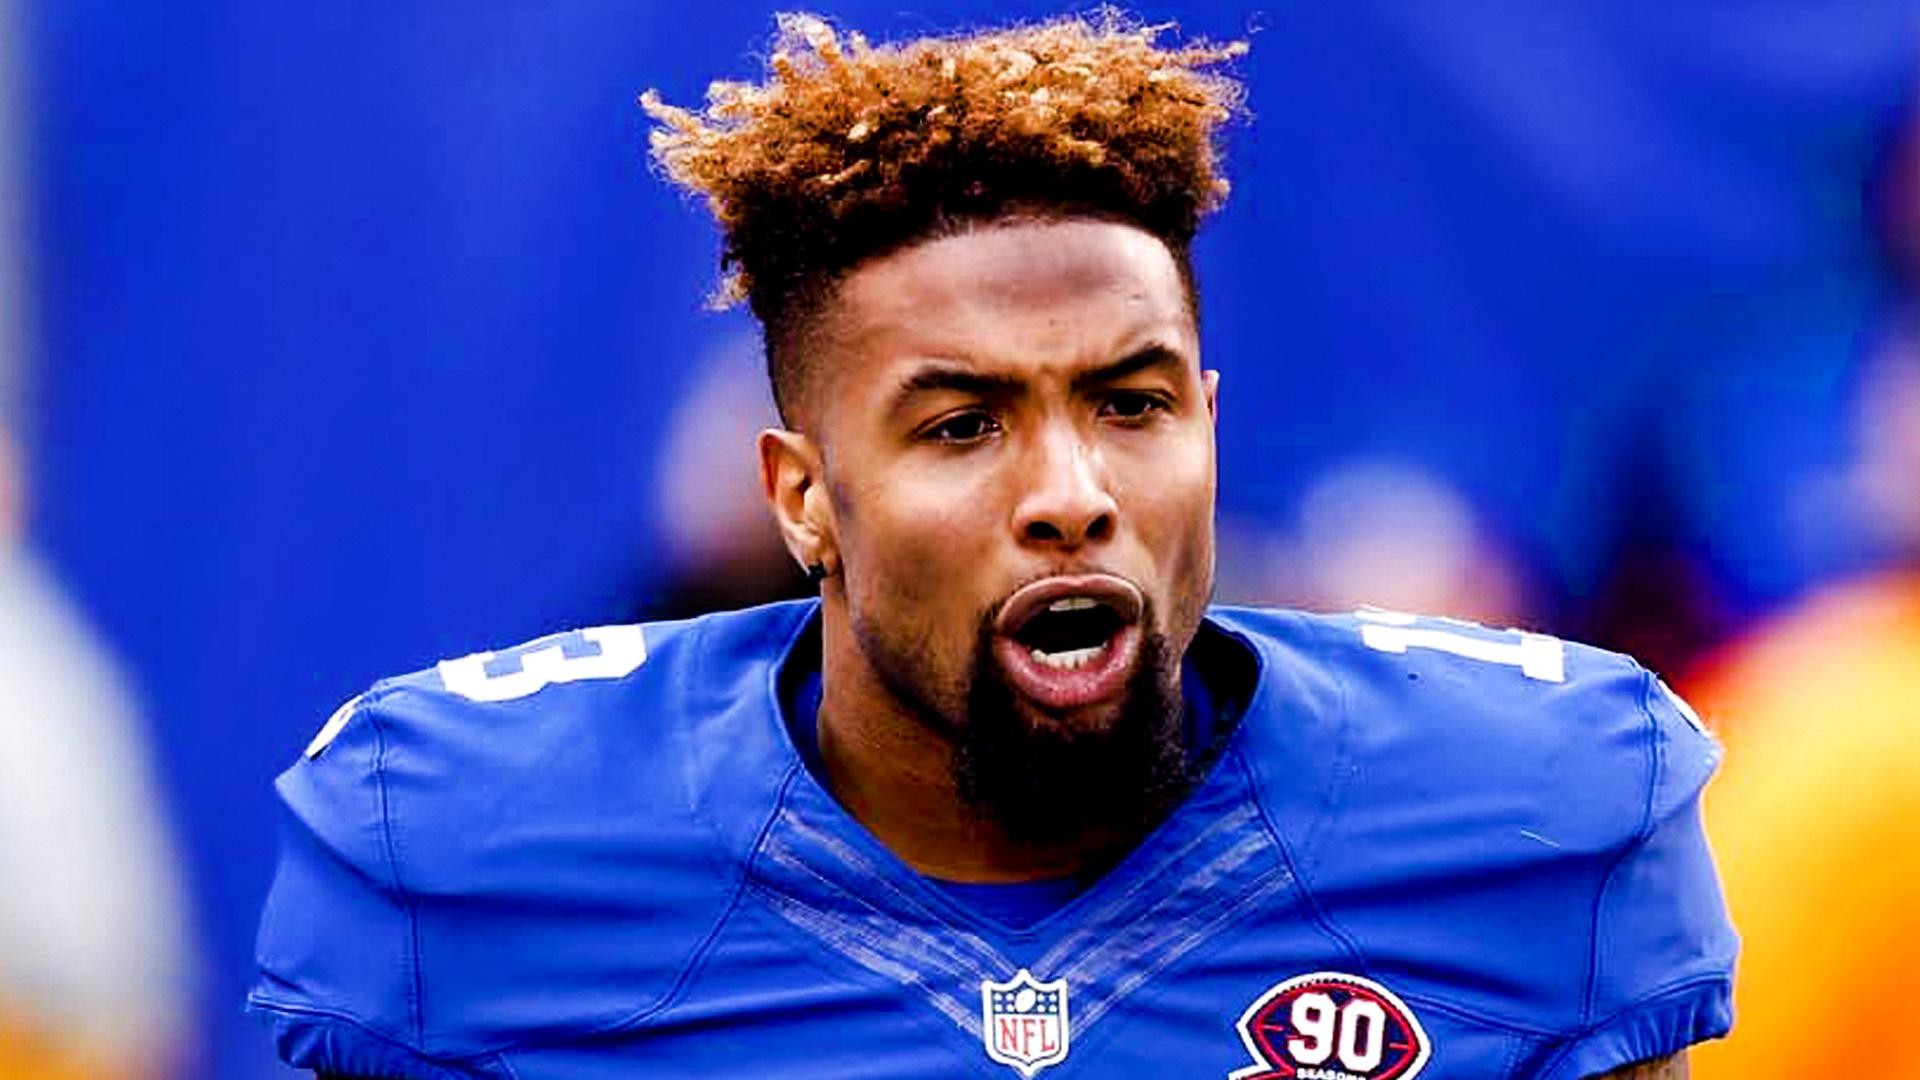 1920x1080 Odell Beckham Jr. Makes One Handed Catch Lying Down - Video Dailymotion